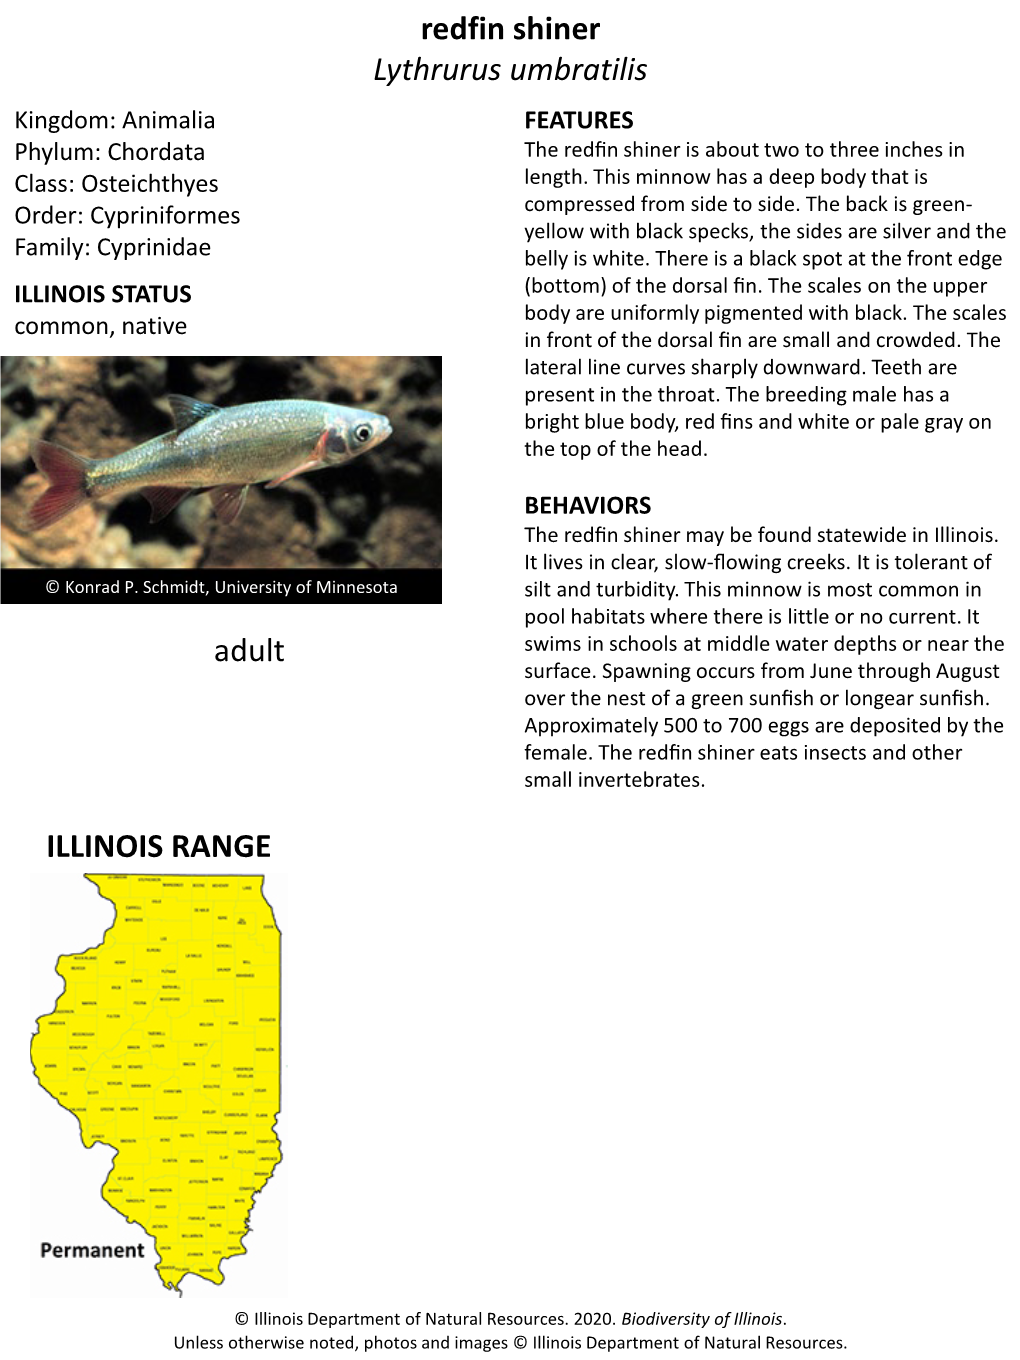 Redfin Shiner Lythrurus Umbratilis Kingdom: Animalia FEATURES Phylum: Chordata the Redﬁn Shiner Is About Two to Three Inches in Class: Osteichthyes Length